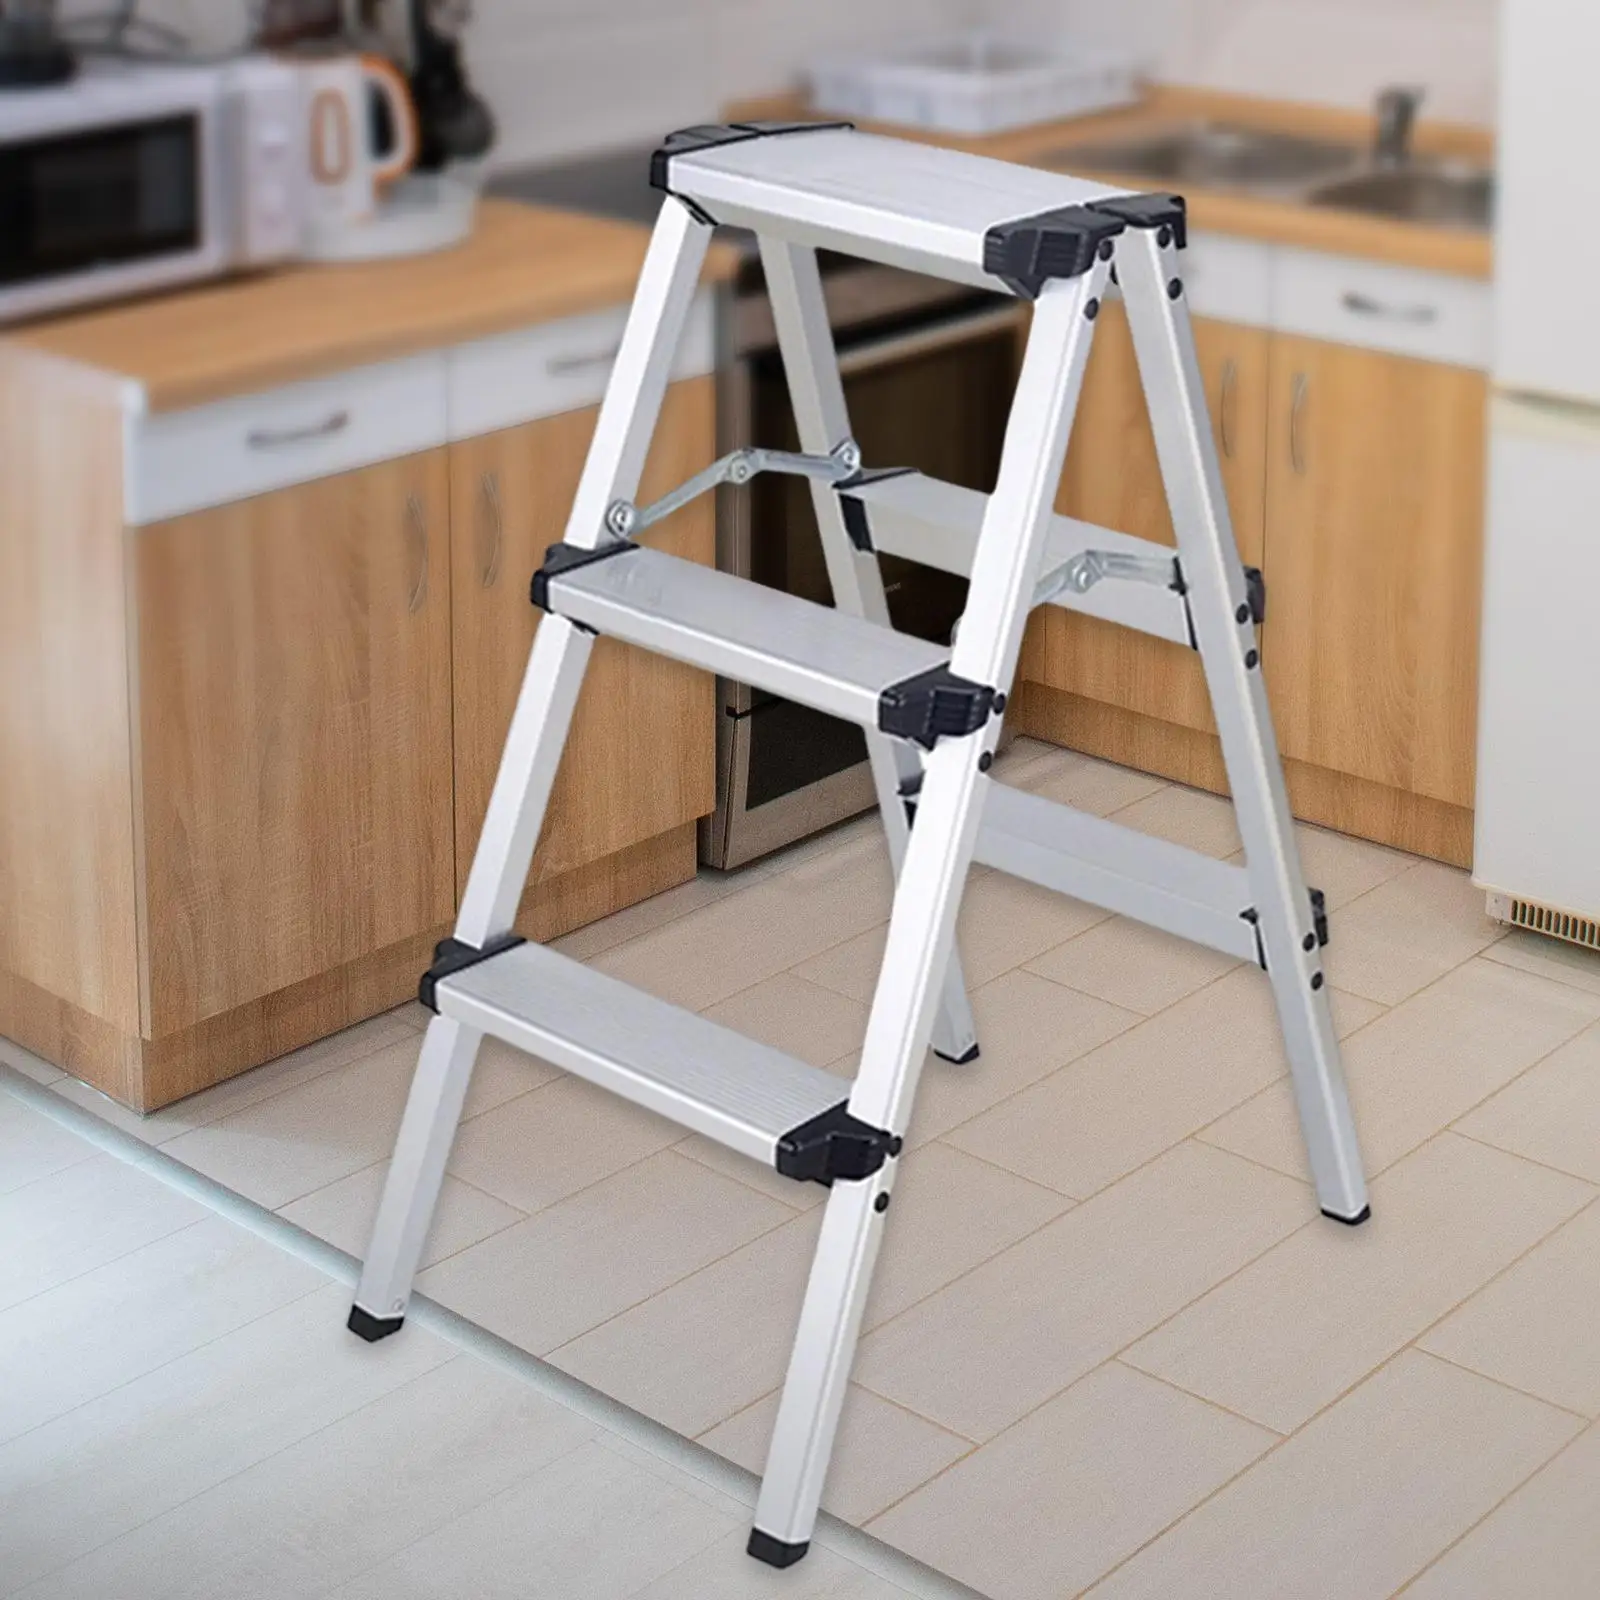 3 Step Herringbone Ladders Collapsible Aluminum Alloy for Office Home Pantry